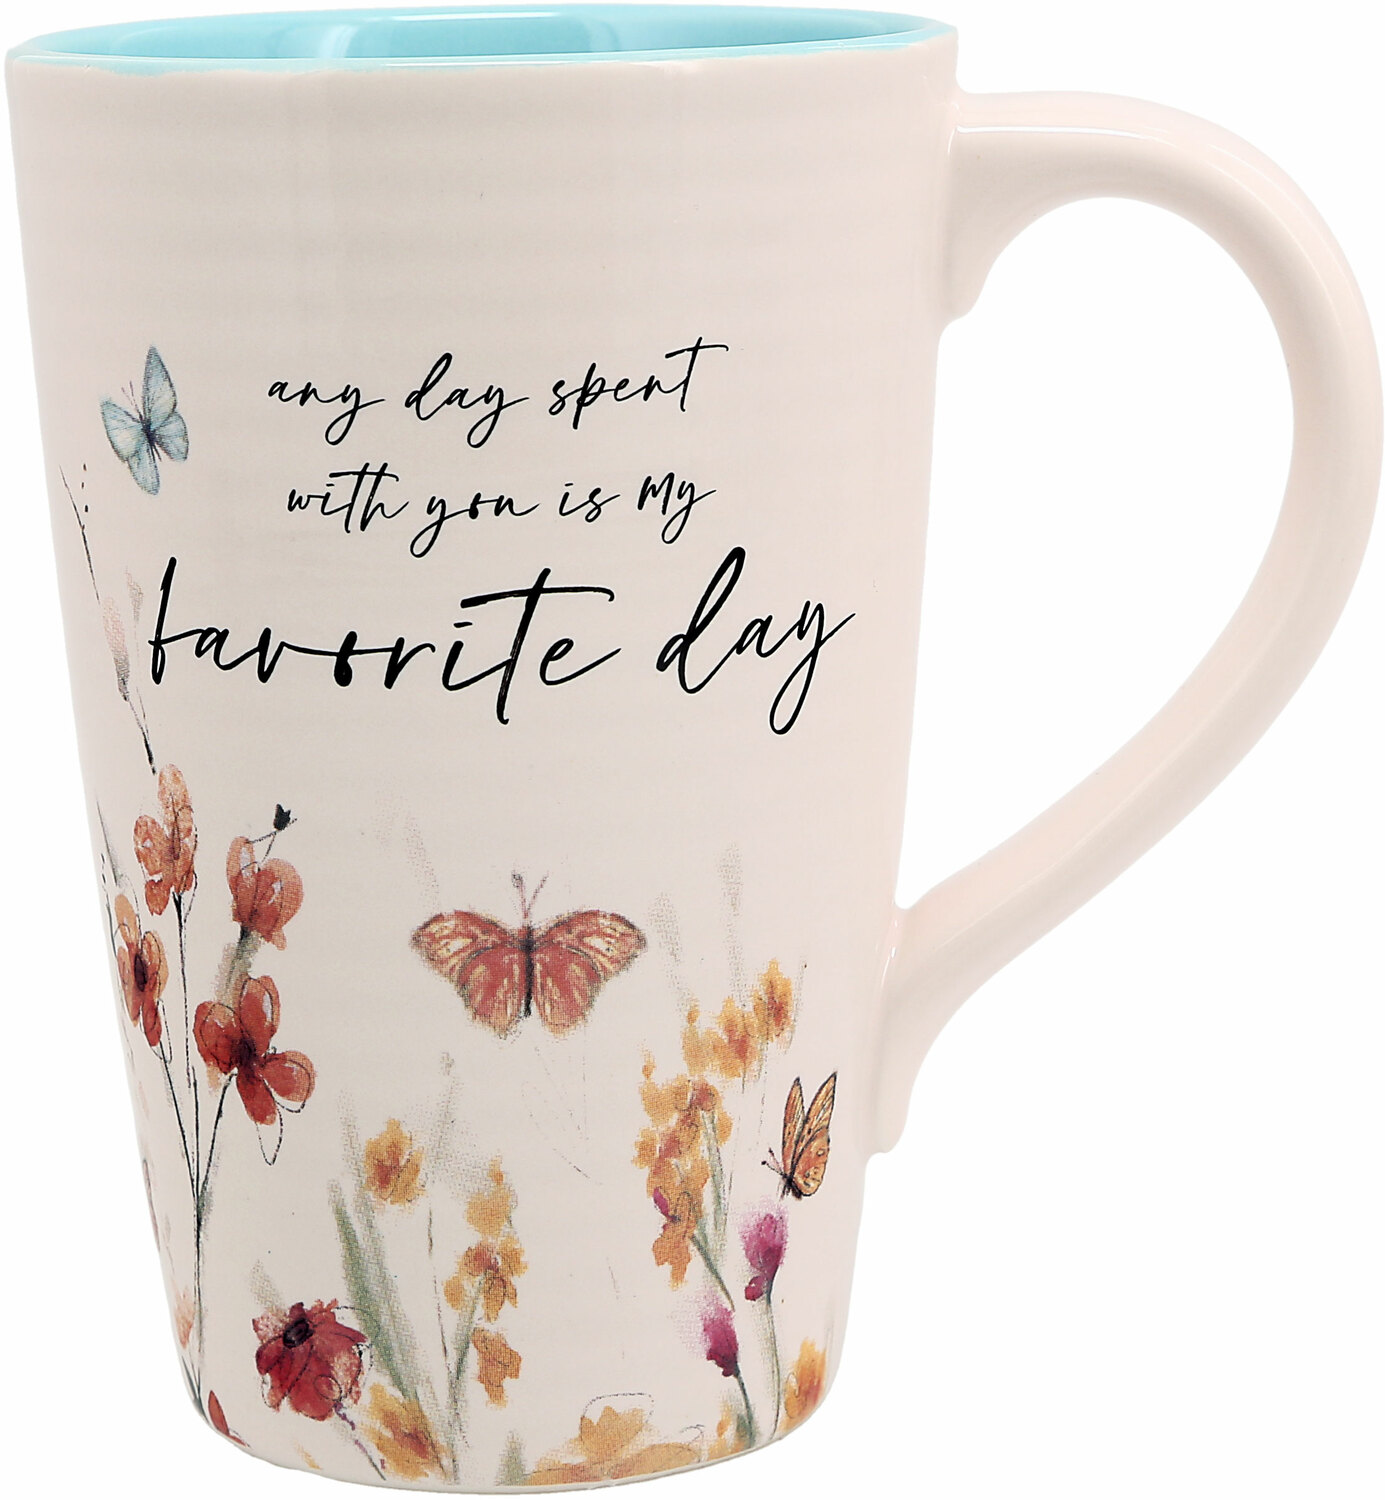 Favorite Day by Meadows of Joy - Favorite Day - 17 oz Cup